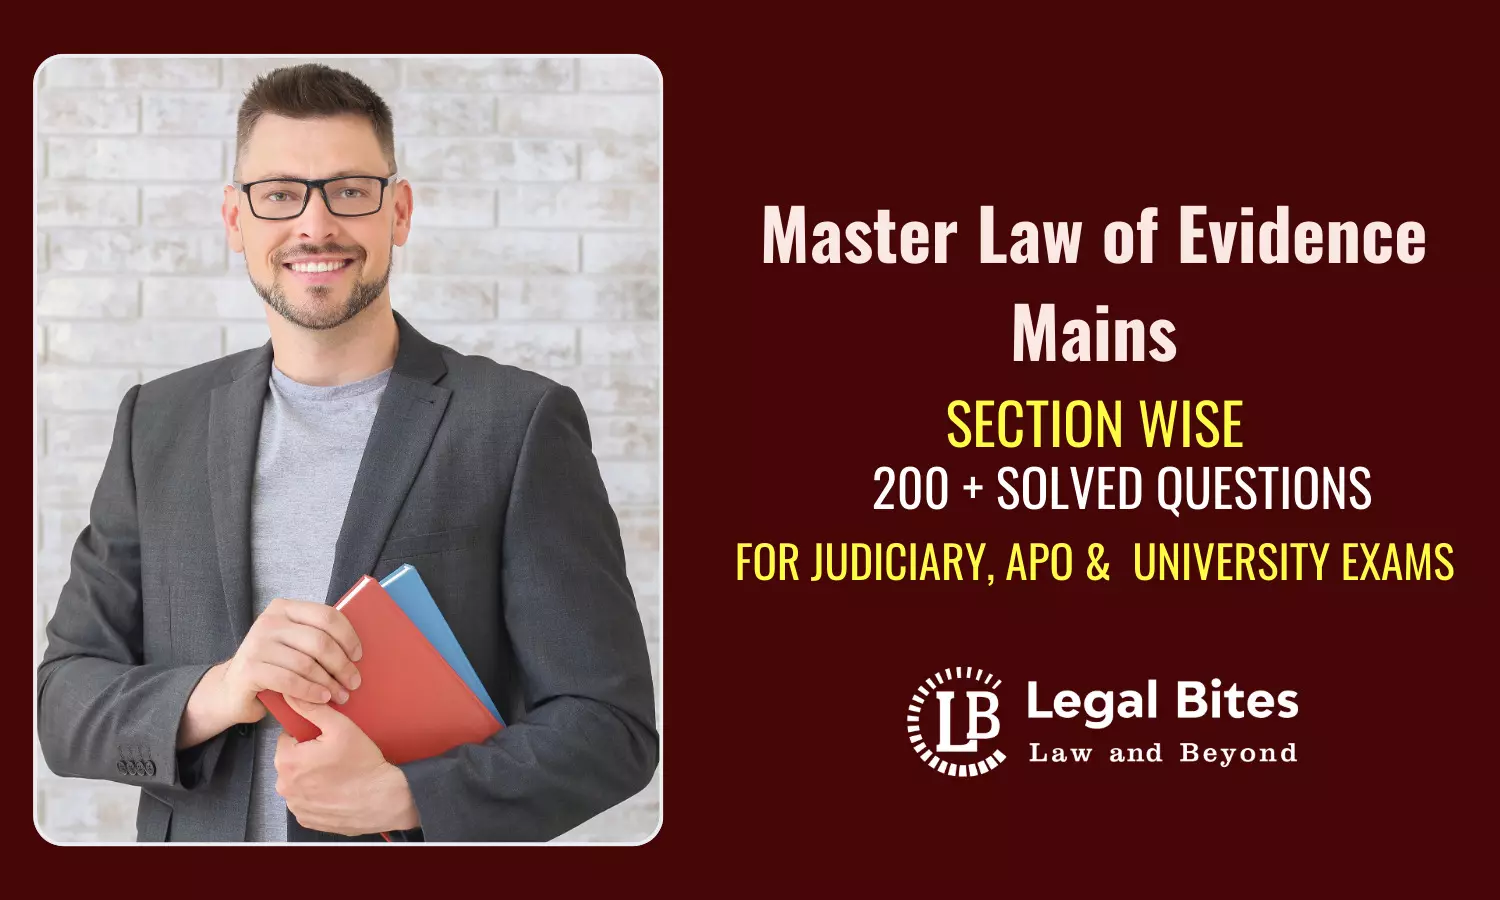 Master Law of Evidence Mains: Legal Bites Law of Evidence Solved Questions Series for Judiciary, APO & University Exams